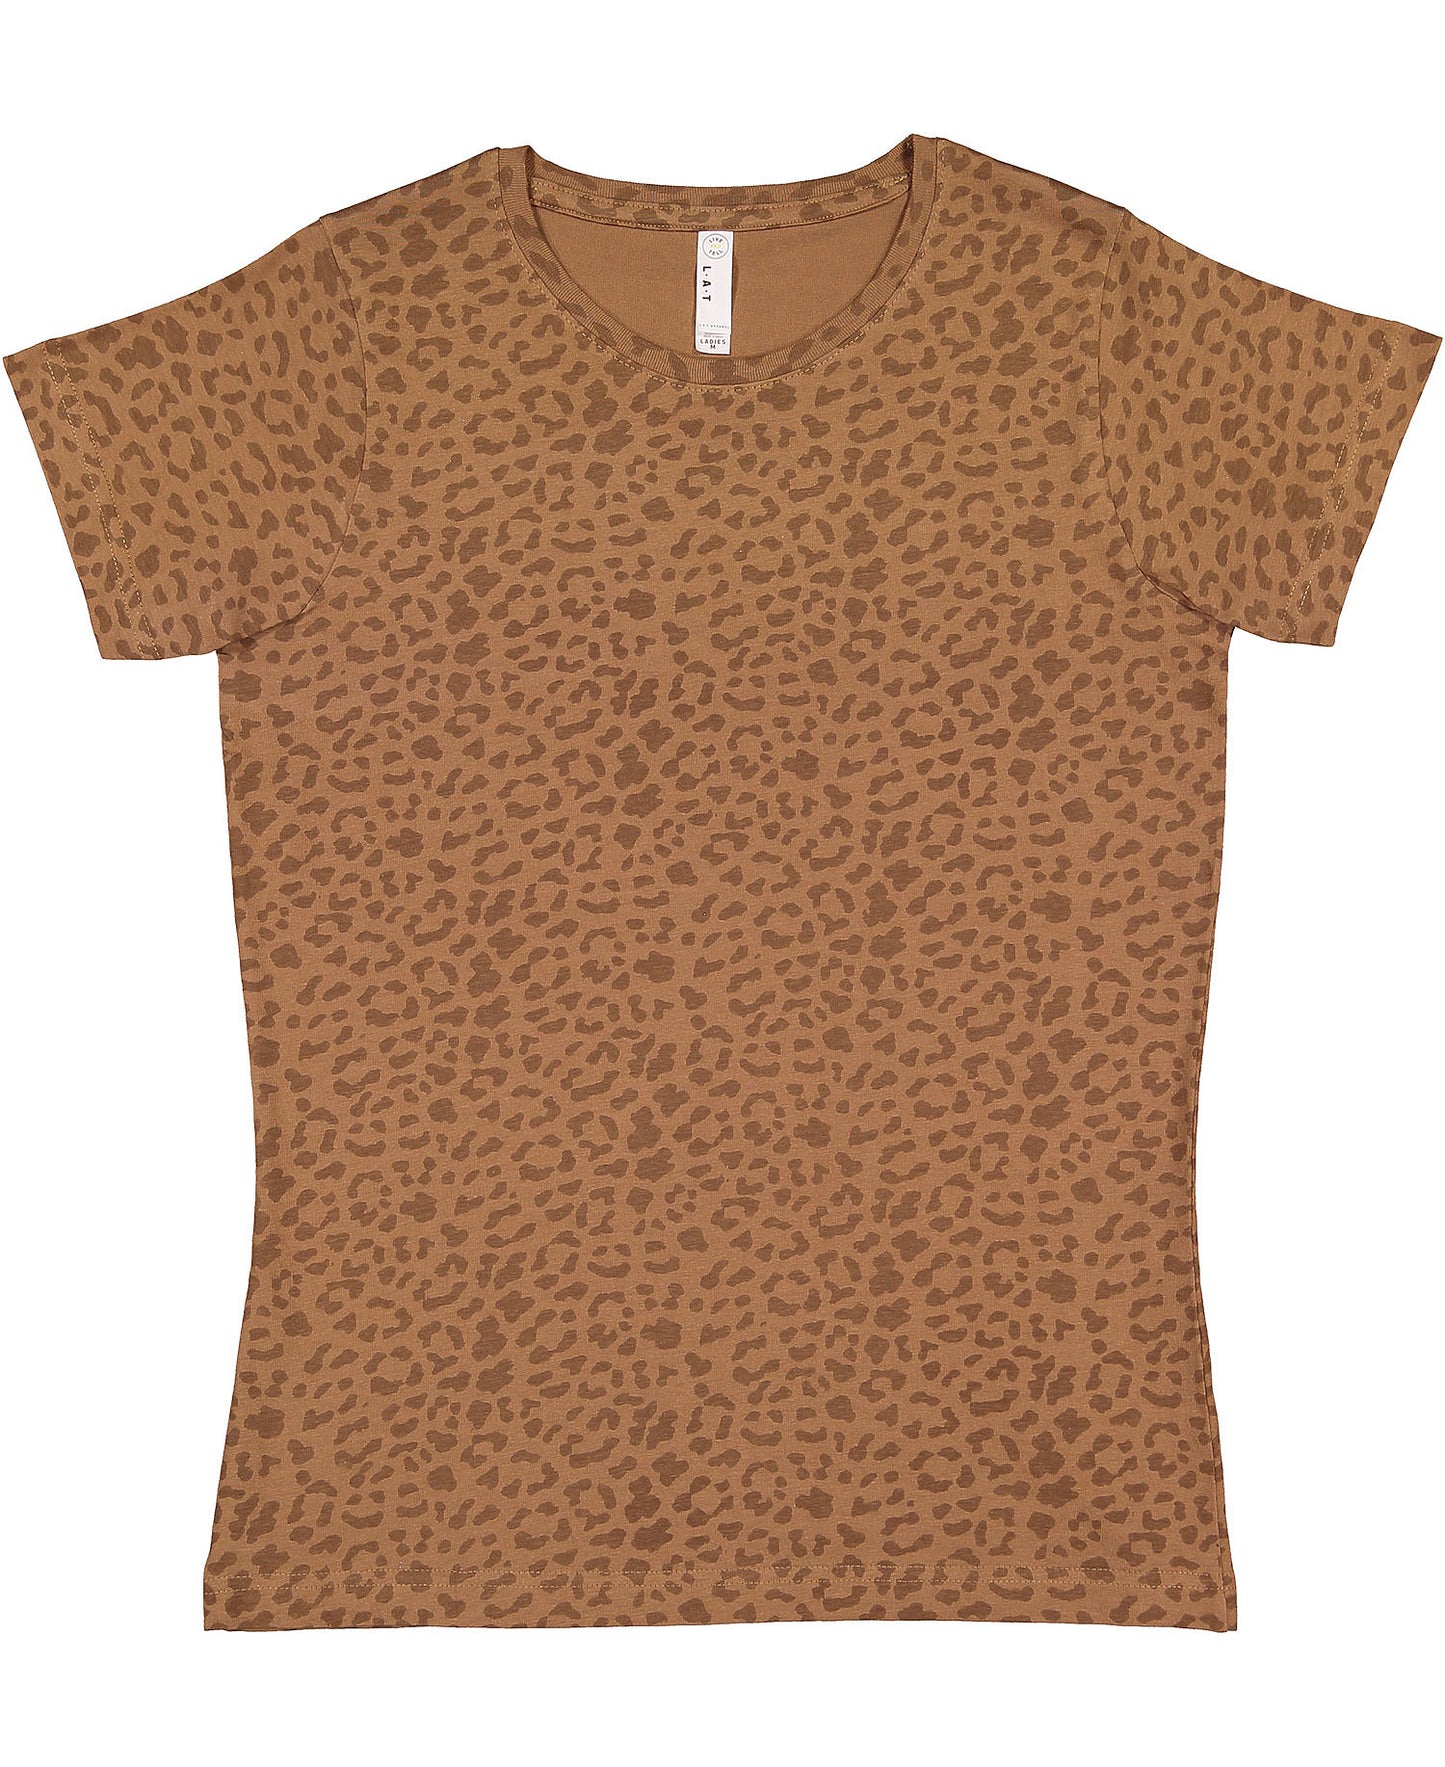 Rabbit Skins Youth Tee - Brown Leopard